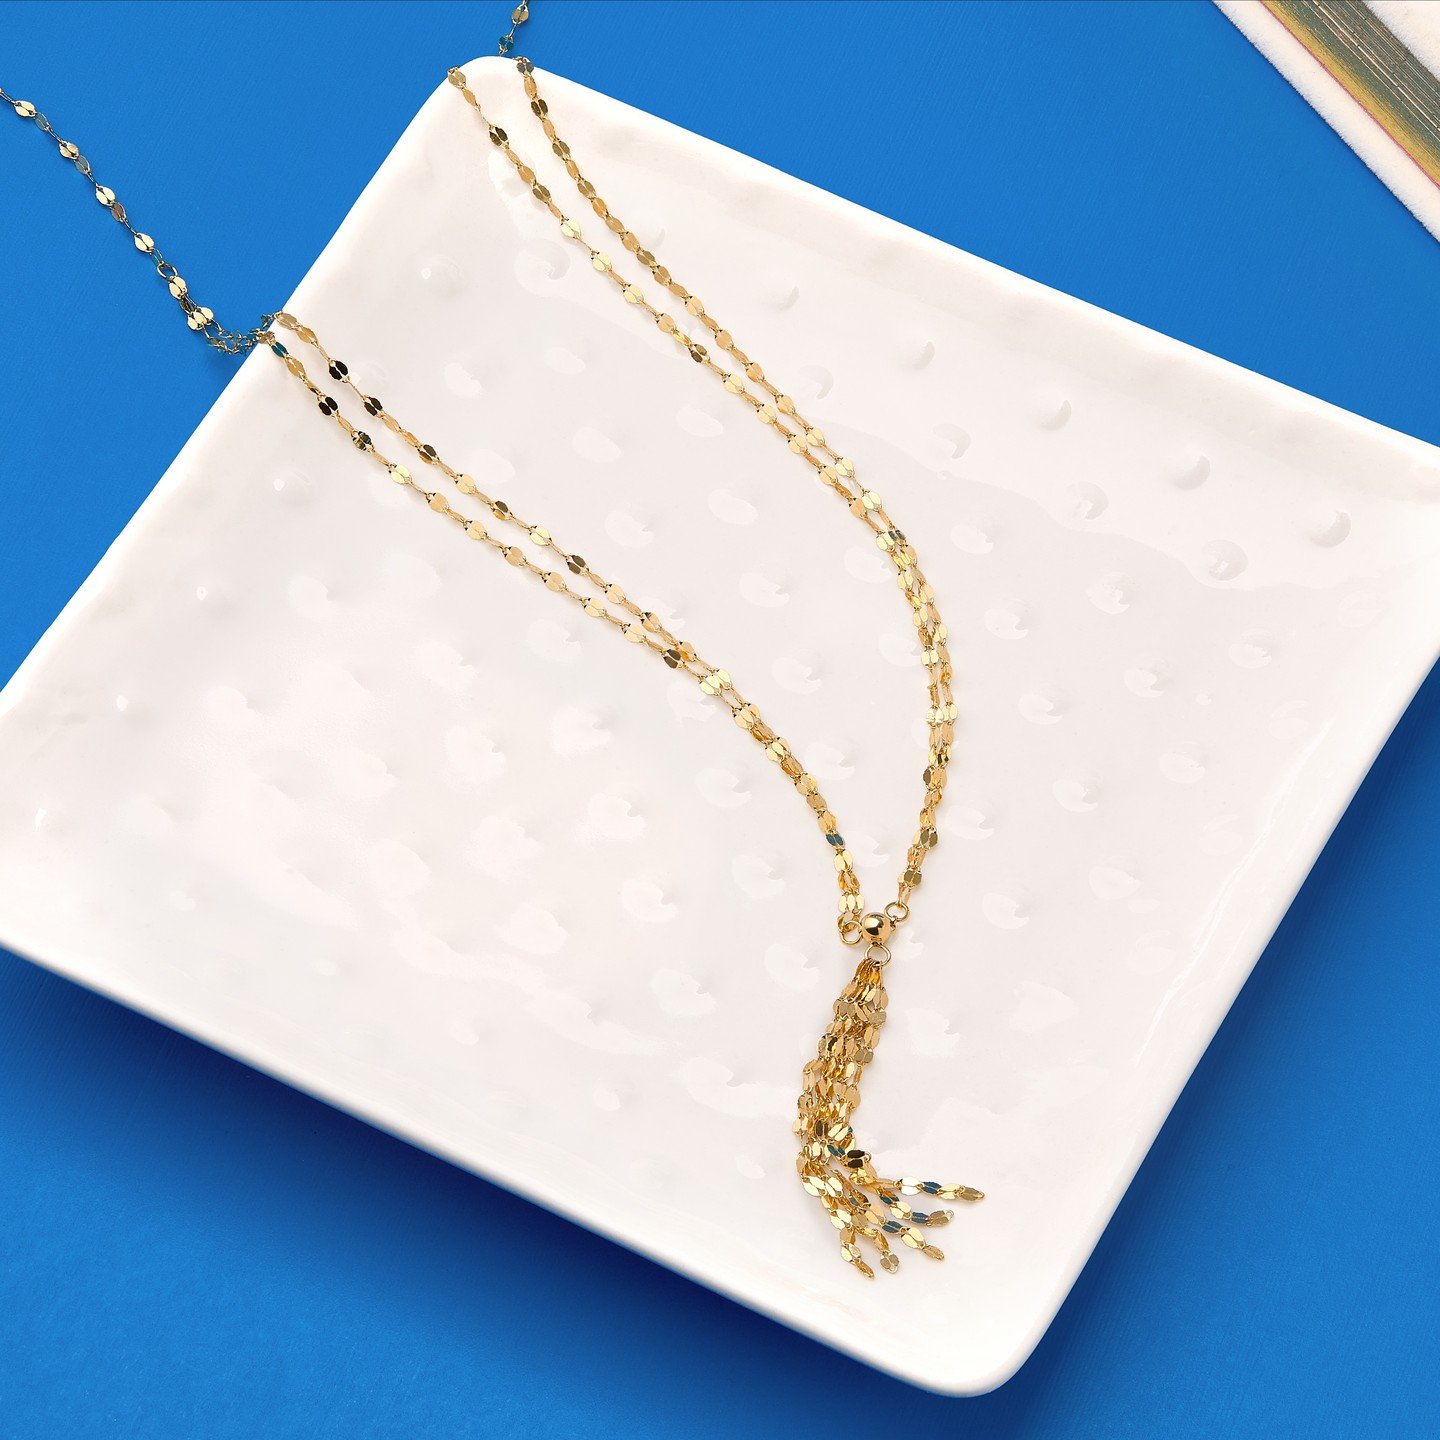 💫 From desk to dinner, this gold tassel lariat is a new faithful companion, turning heads and sparking conversations! 
.
.
.
#QuietLuxury #gold #migm #mayisgoldmonth